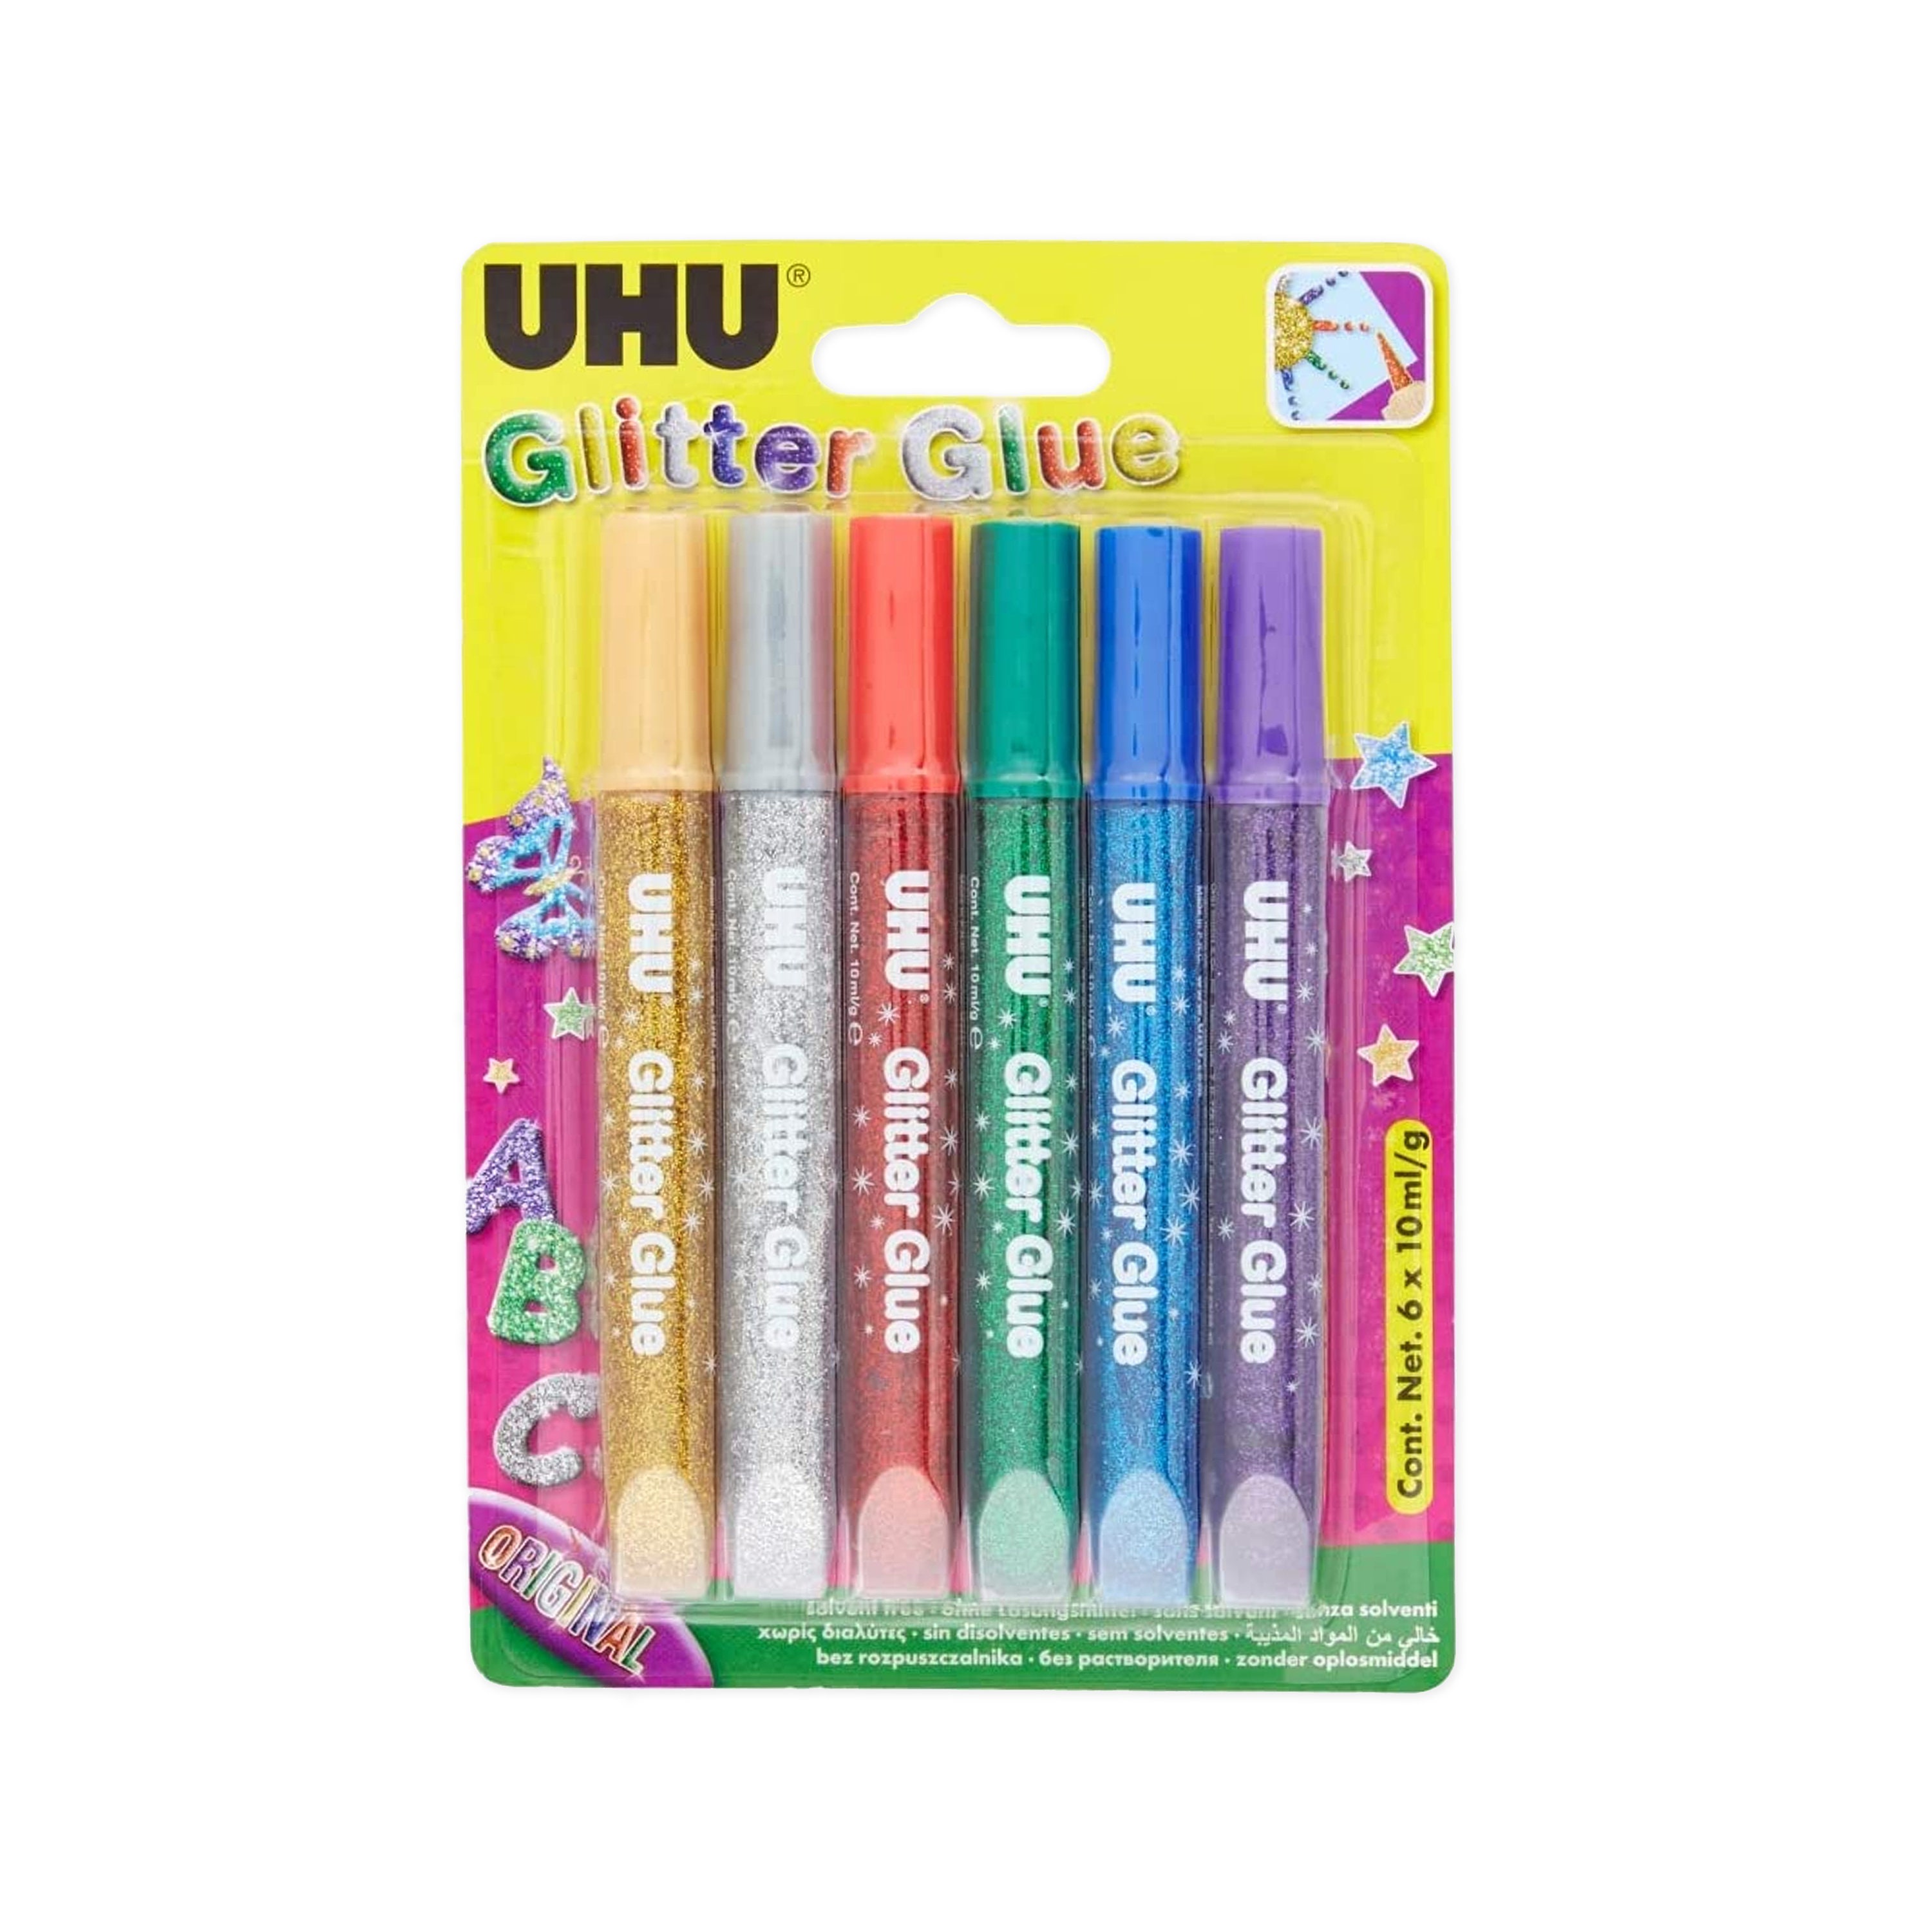 2 Way Glue Pen Permanent & Temporary Adhesive Memory System Dual Action  Clear Dry Two Way Glue for Crafts Card Making Scrapbooking Glitter 